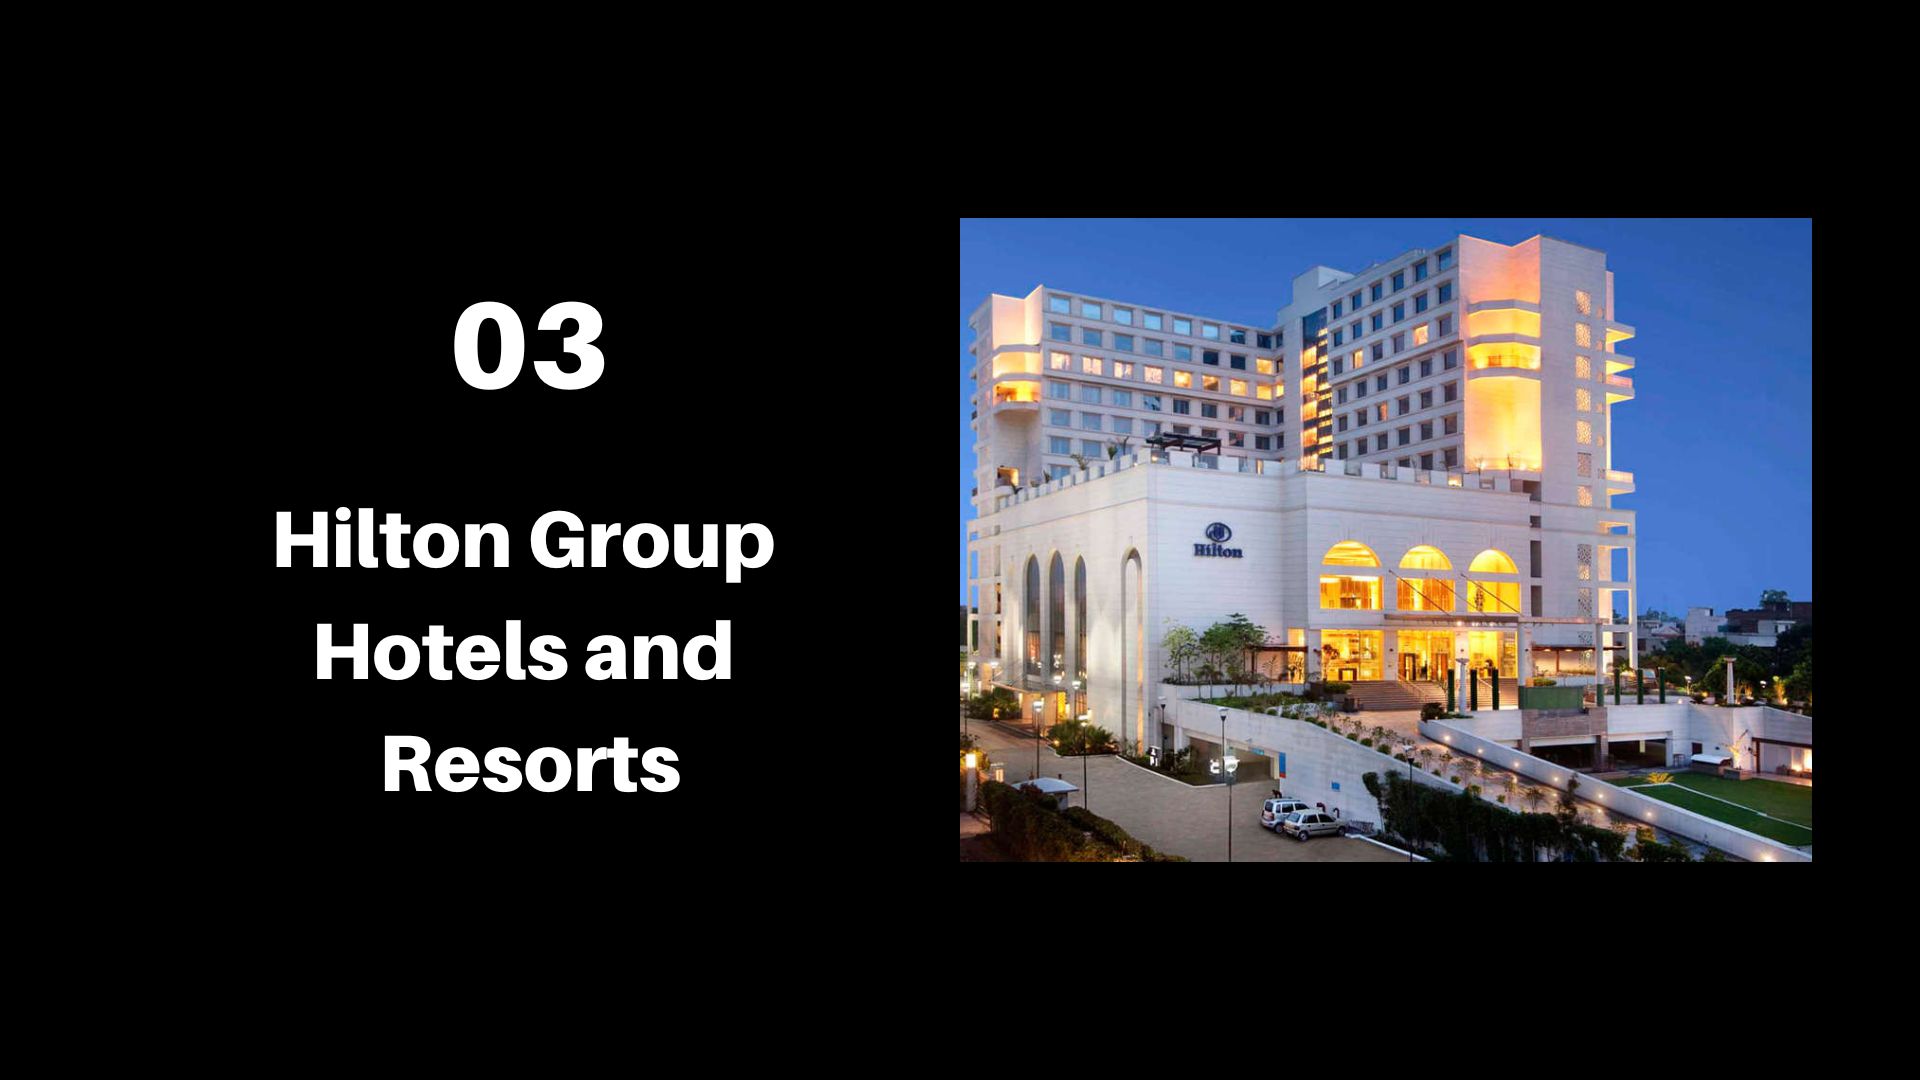 Hilton Group Hotels and Resorts